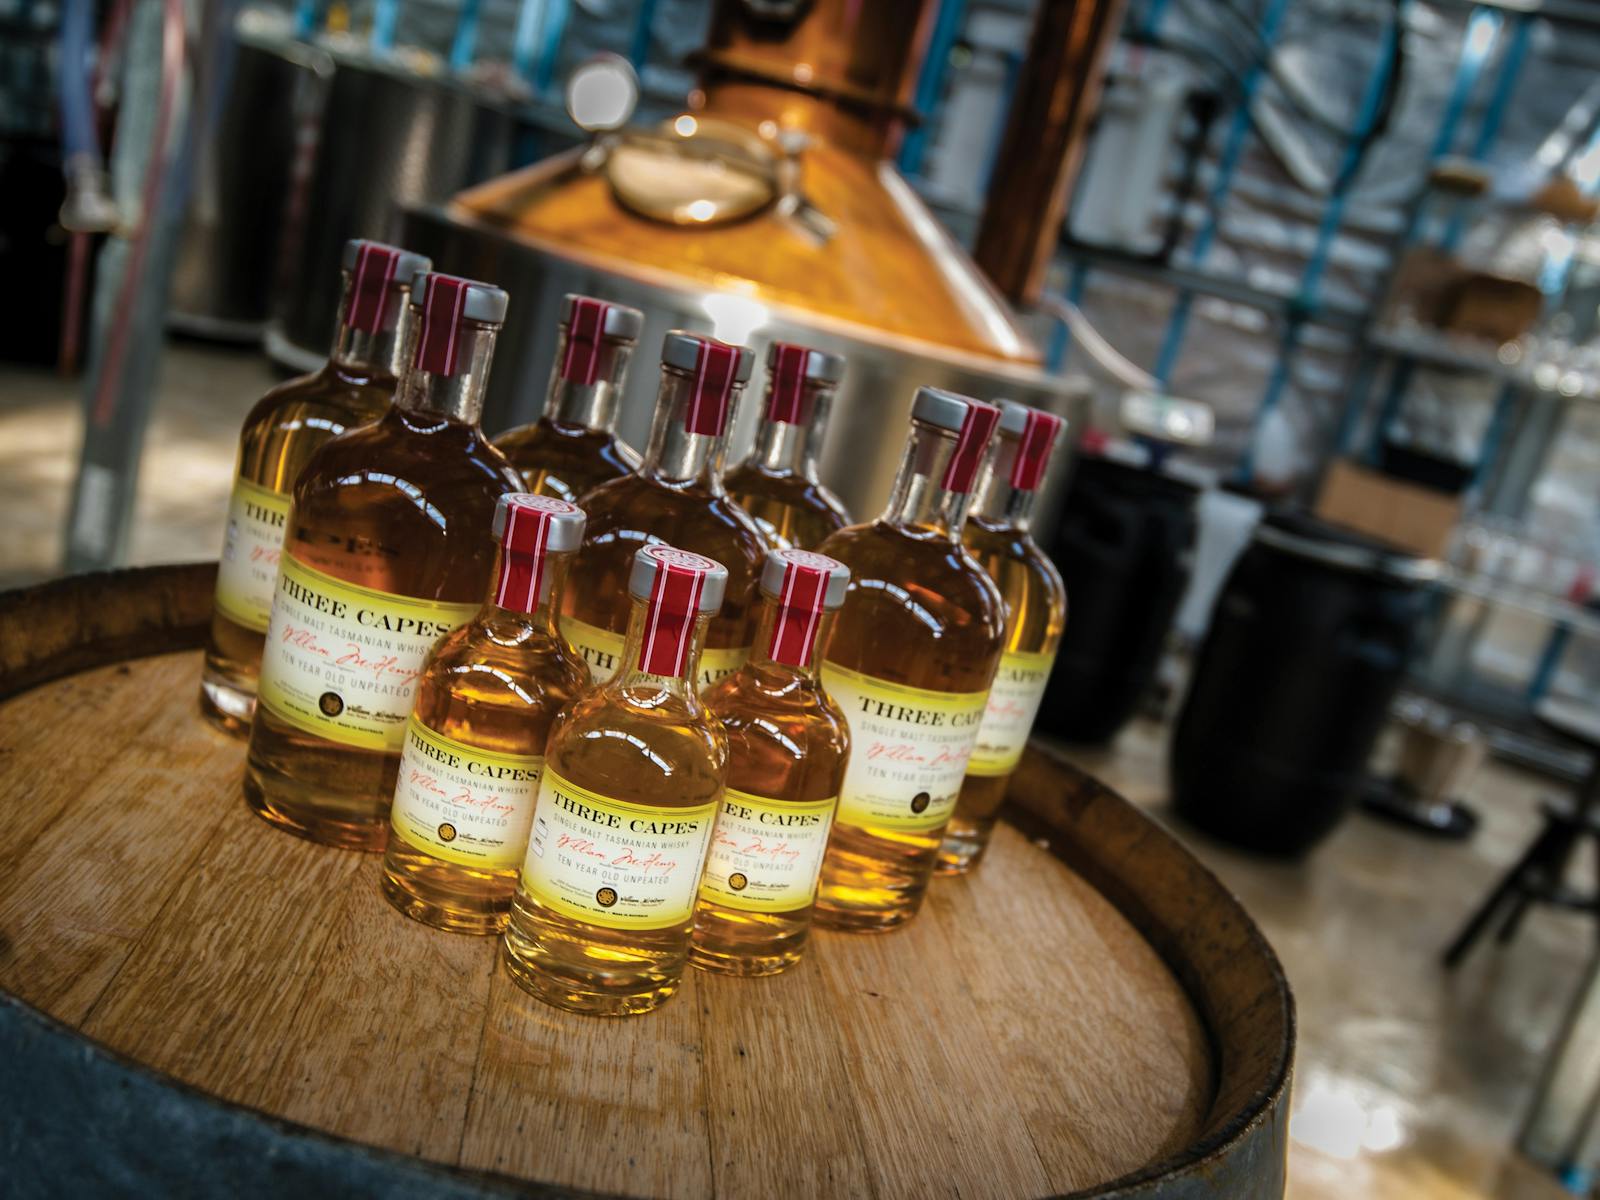 McHenry Distillery is just one of the many regional distilleries Adventure Trails Tasmania can visit